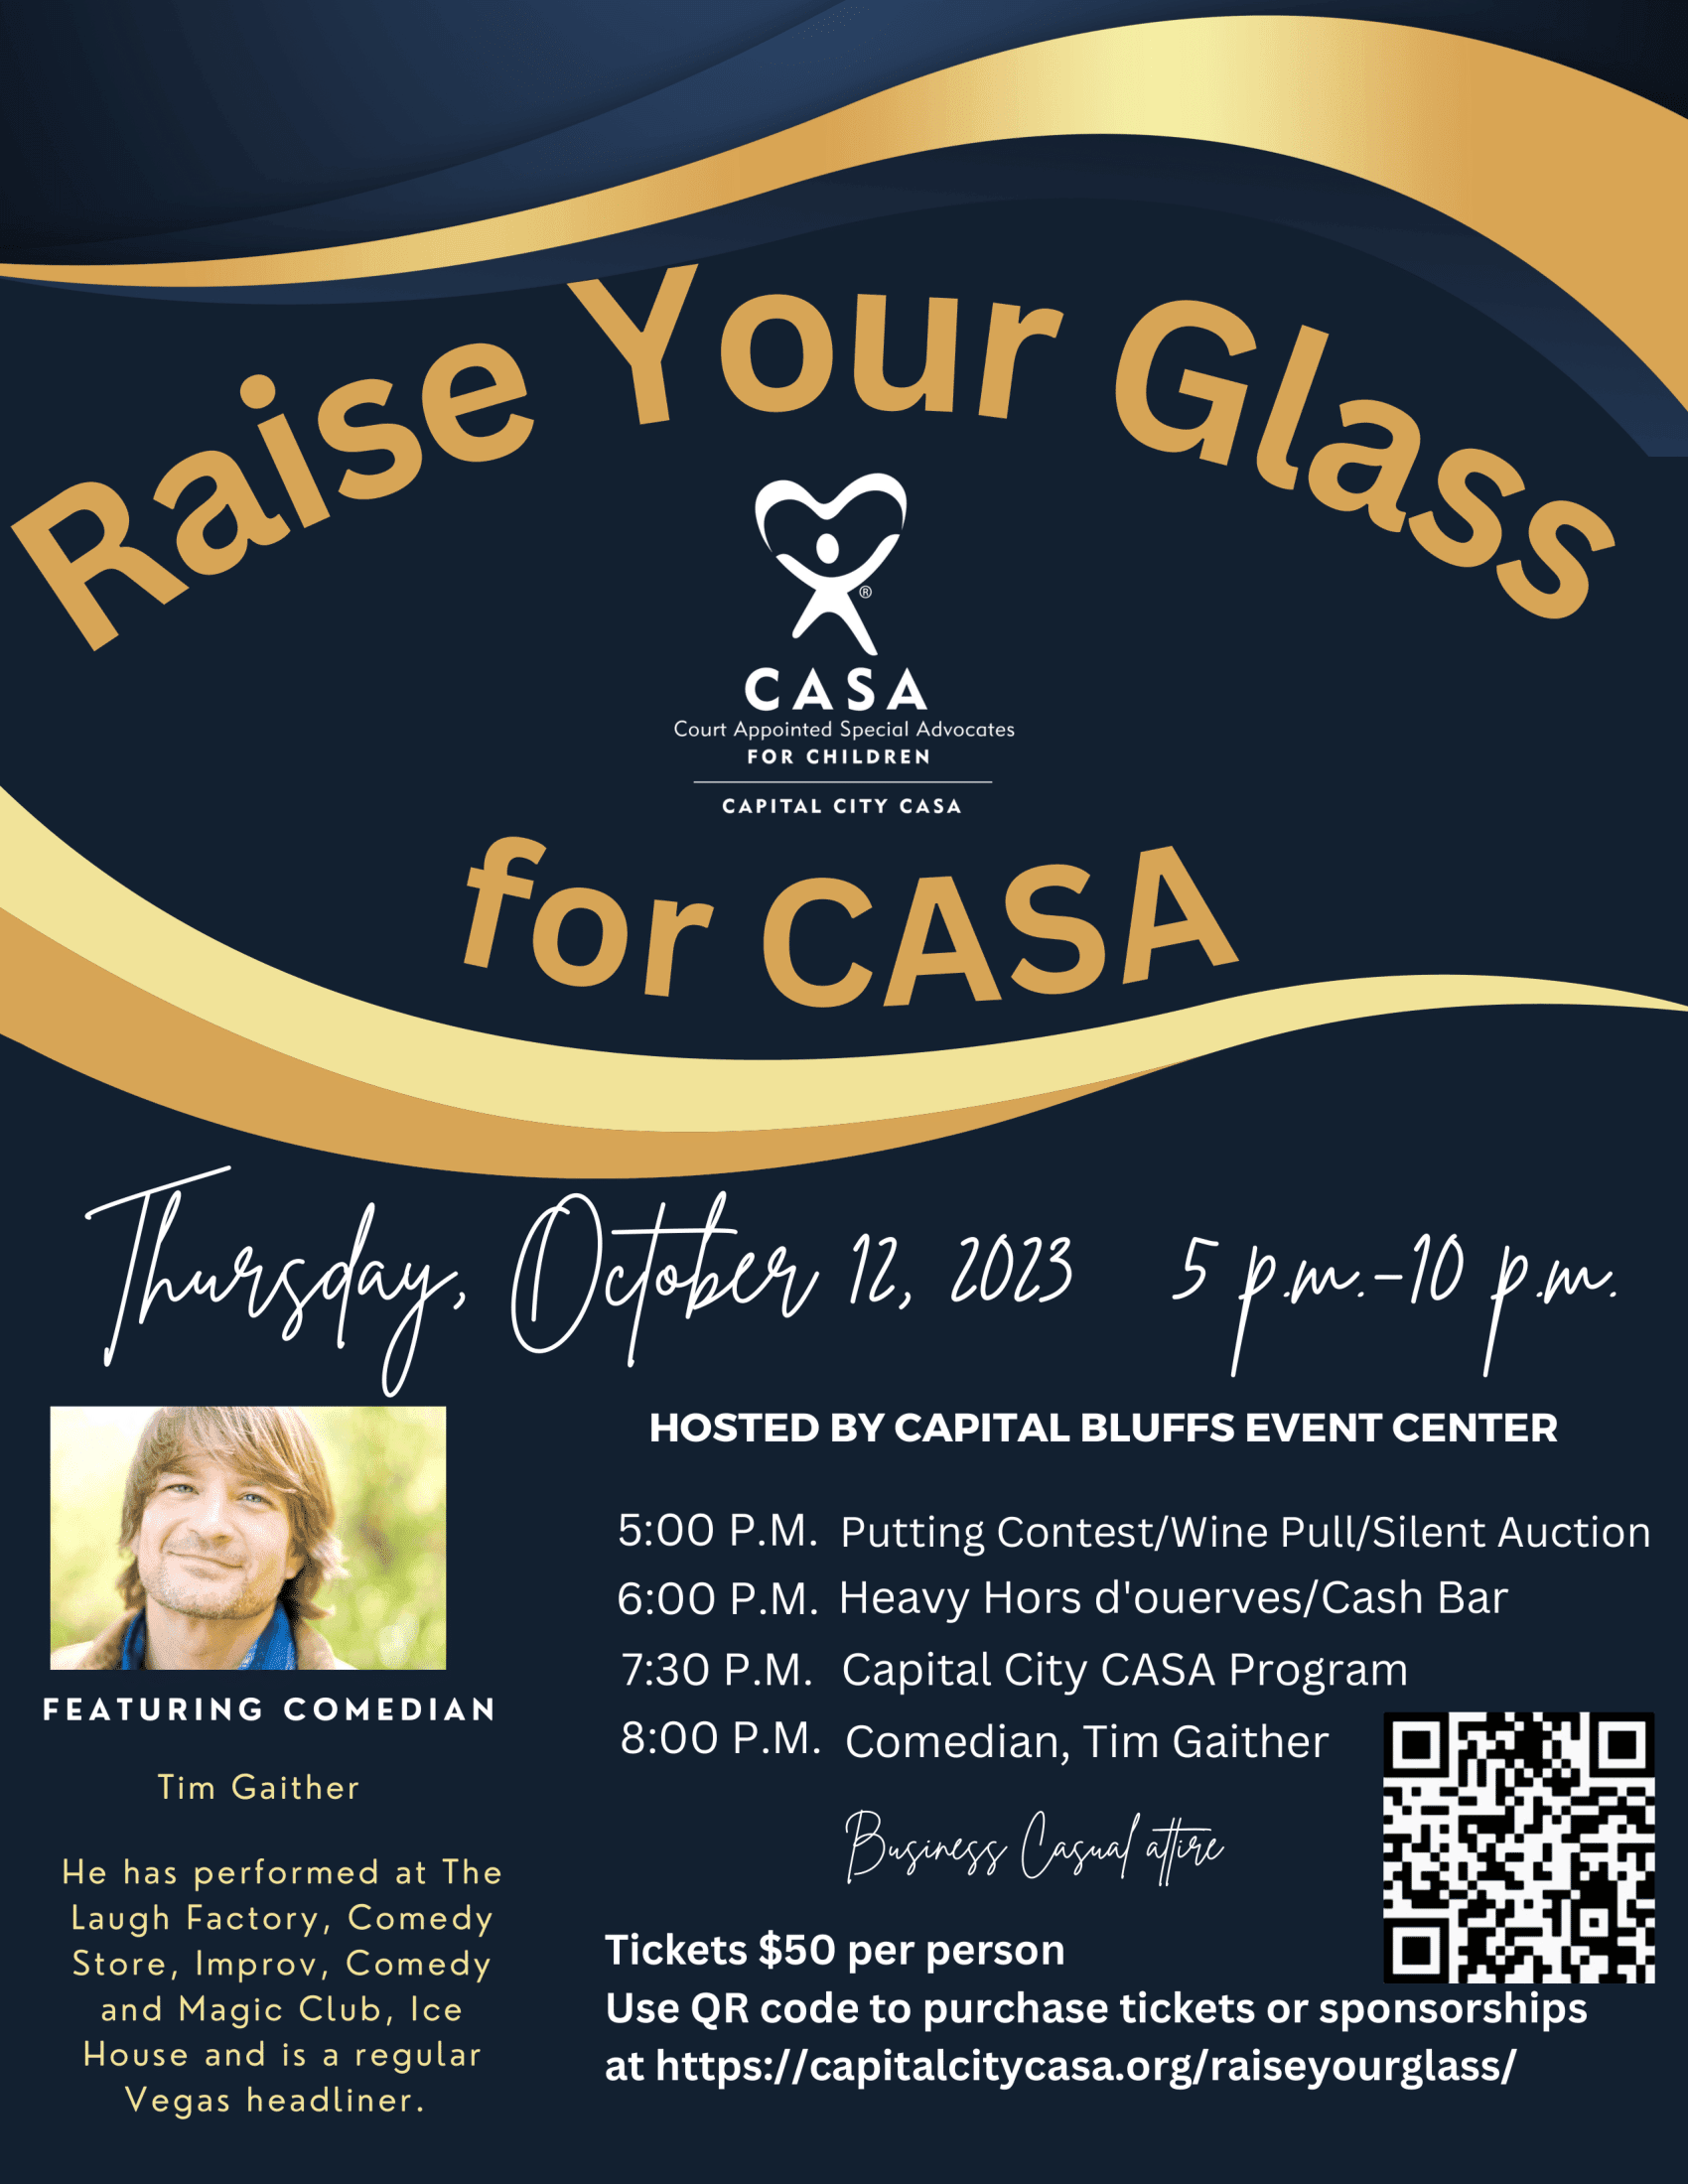 Raise your glass for CASA event flyer. October 12 from 5:00 PM to 10:00 PM.